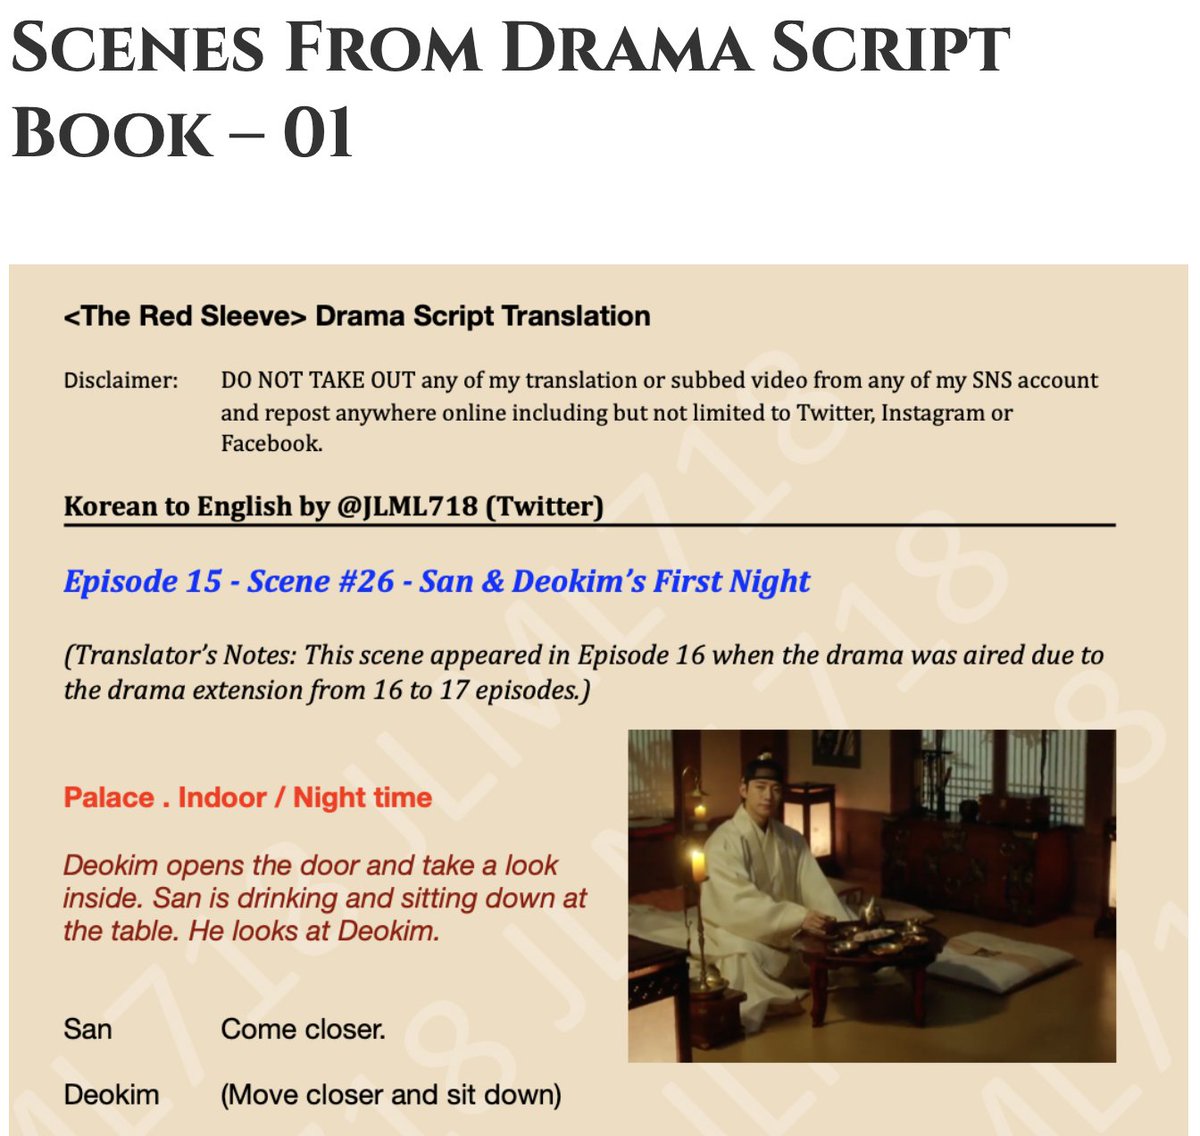 #TheRedSleeve #LeeJunho #Junho [ENG TRANS] Translations for some scenes in TRS from the drama script book. It's been a while... But it's timeless. To read the full translation for this scene, go to: unlocktheredsleeve.wordpress.com/scenes-from-dr…